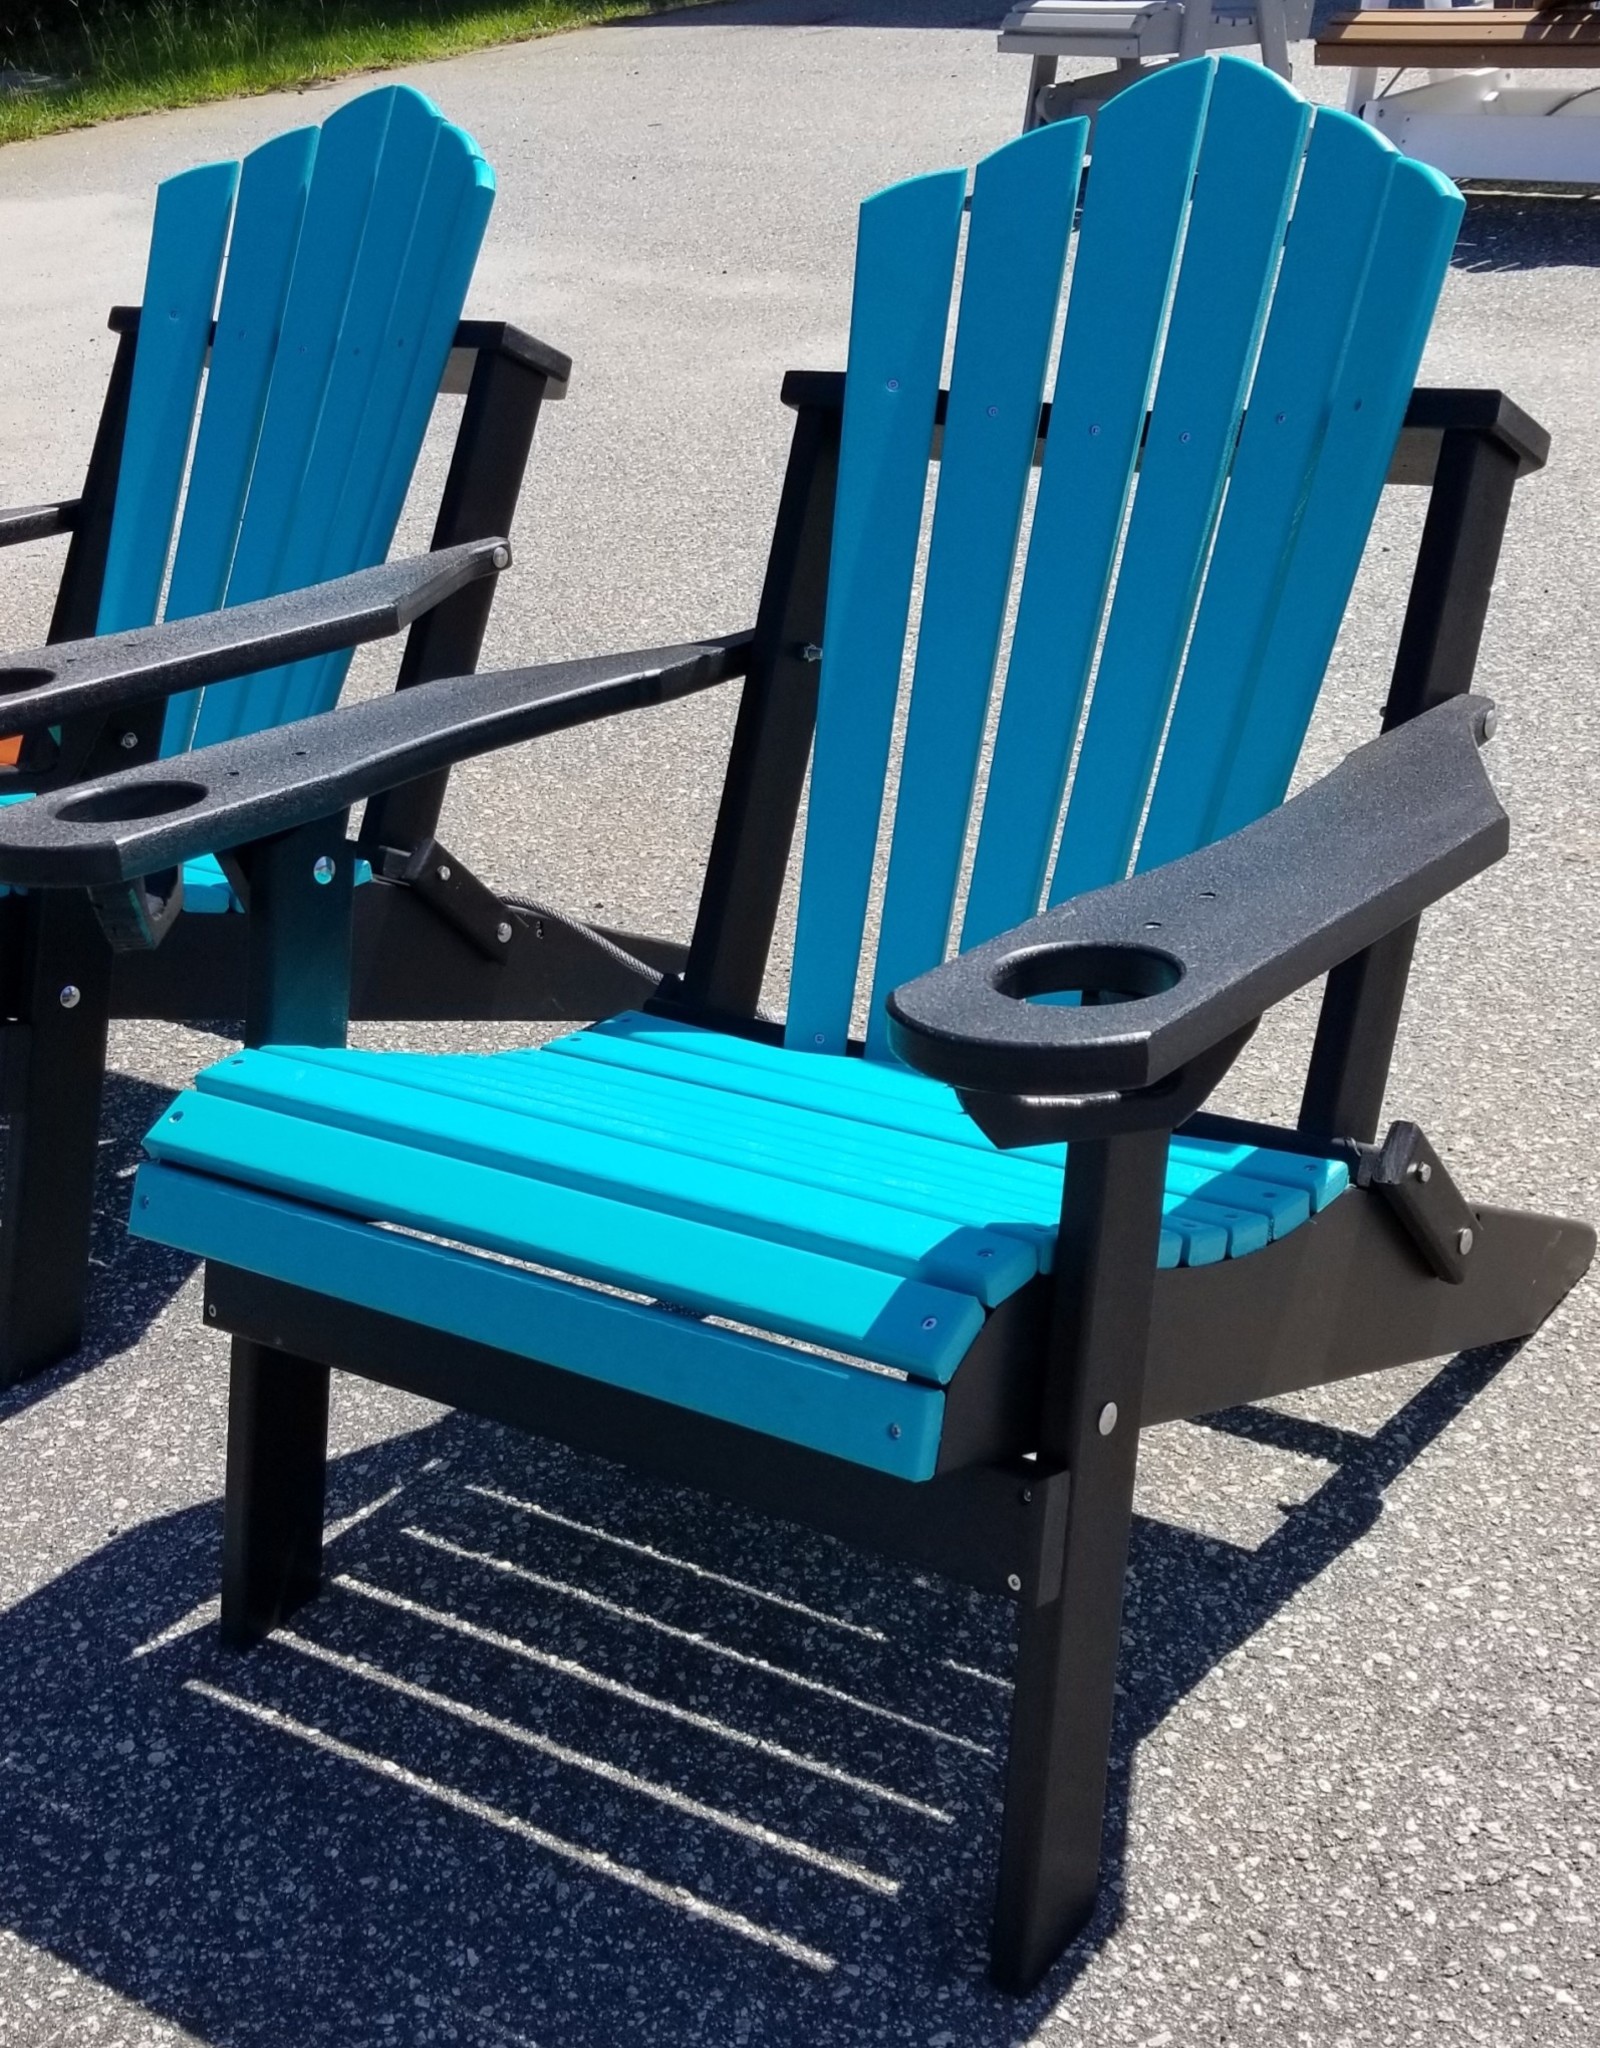 HDM Outdoor Folding Adirondack chair w/ Built-in Cupholders- 19 colors available!